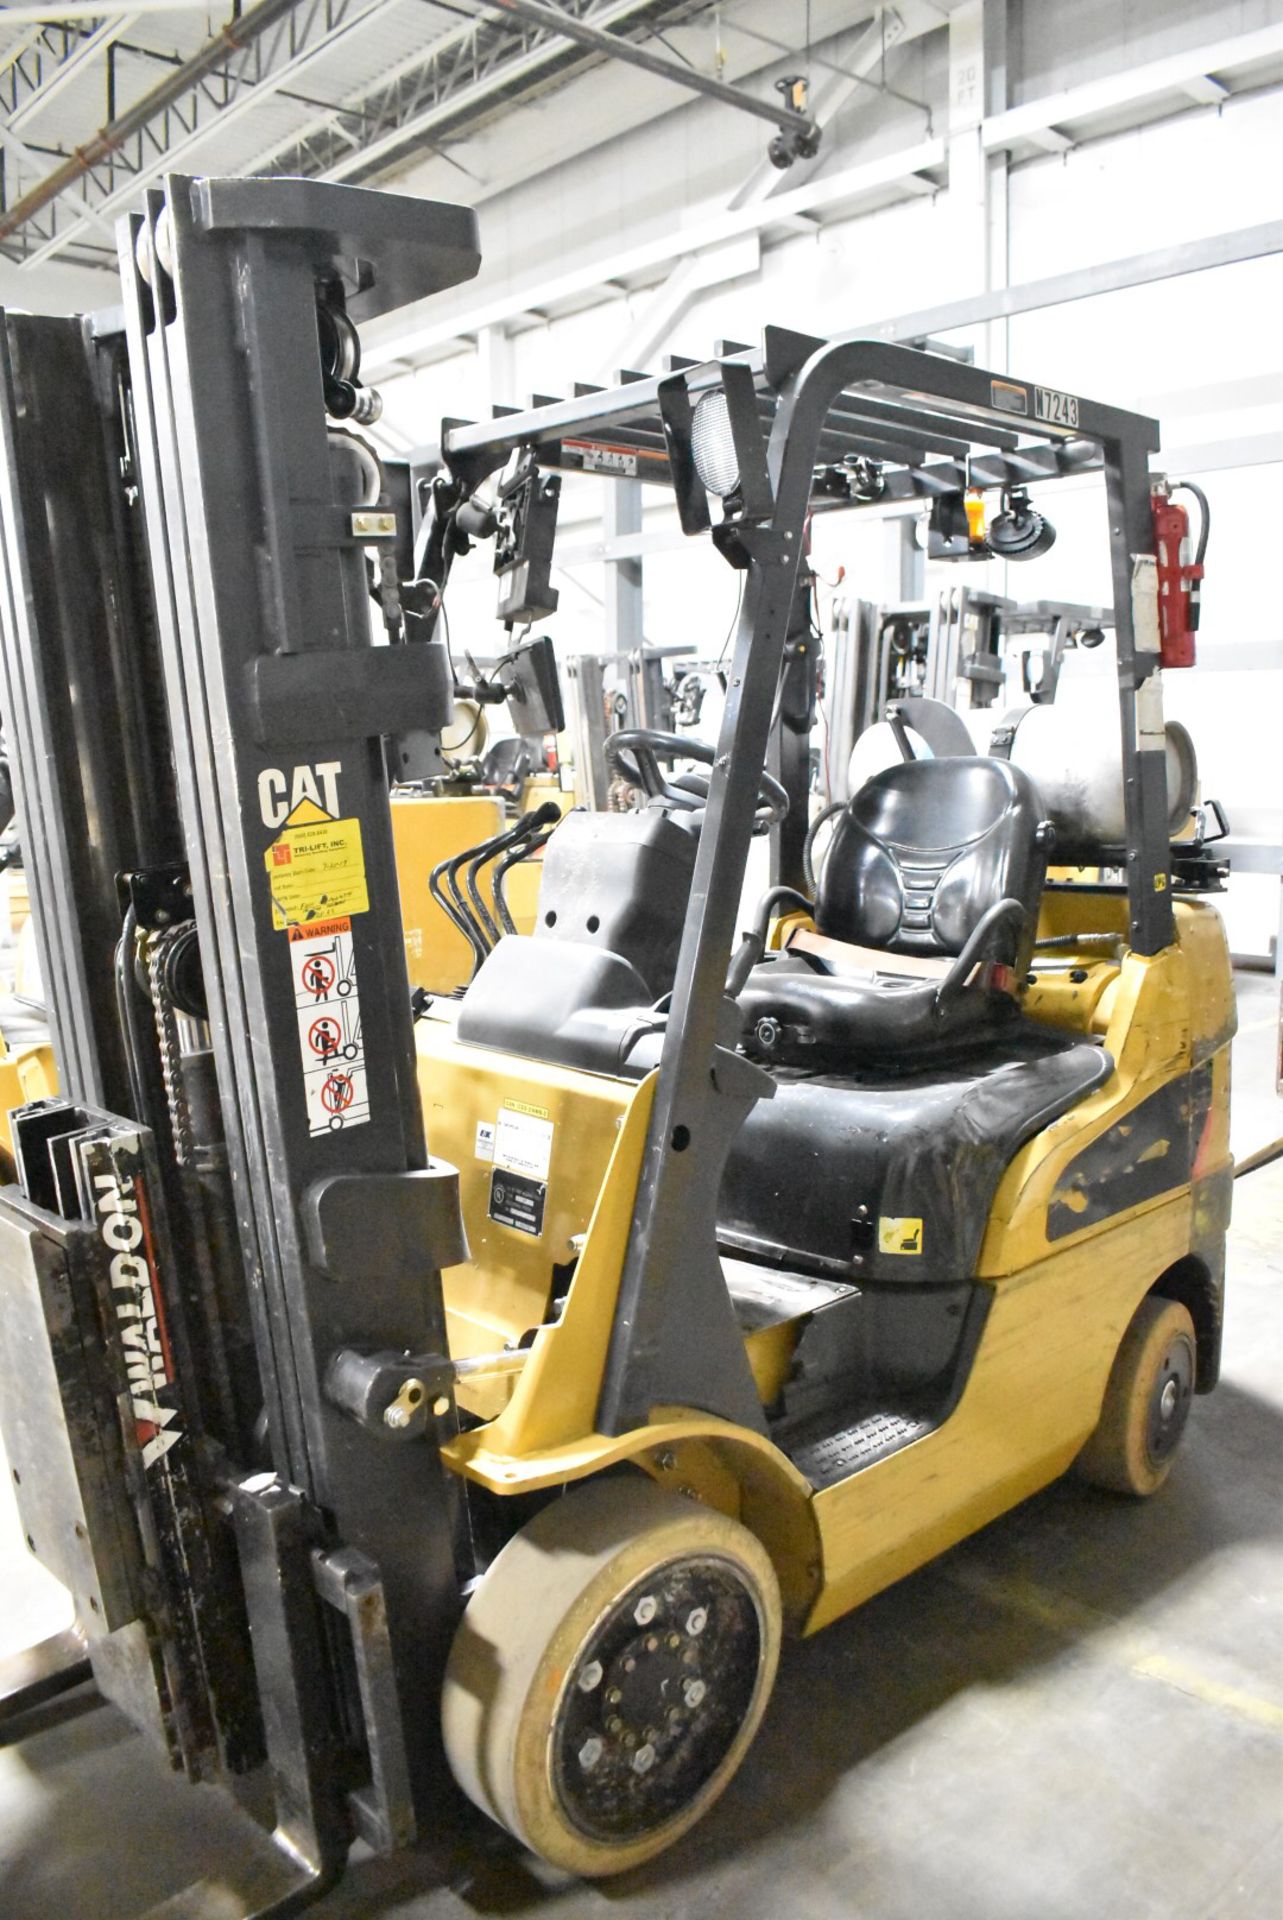 CATERPILLAR 2C5000 4,950 LBS. CAPACITY LPG FORKLIFT WITH 187" MAX VERTICAL REACH, 3-STAGE HIGH - Image 4 of 9